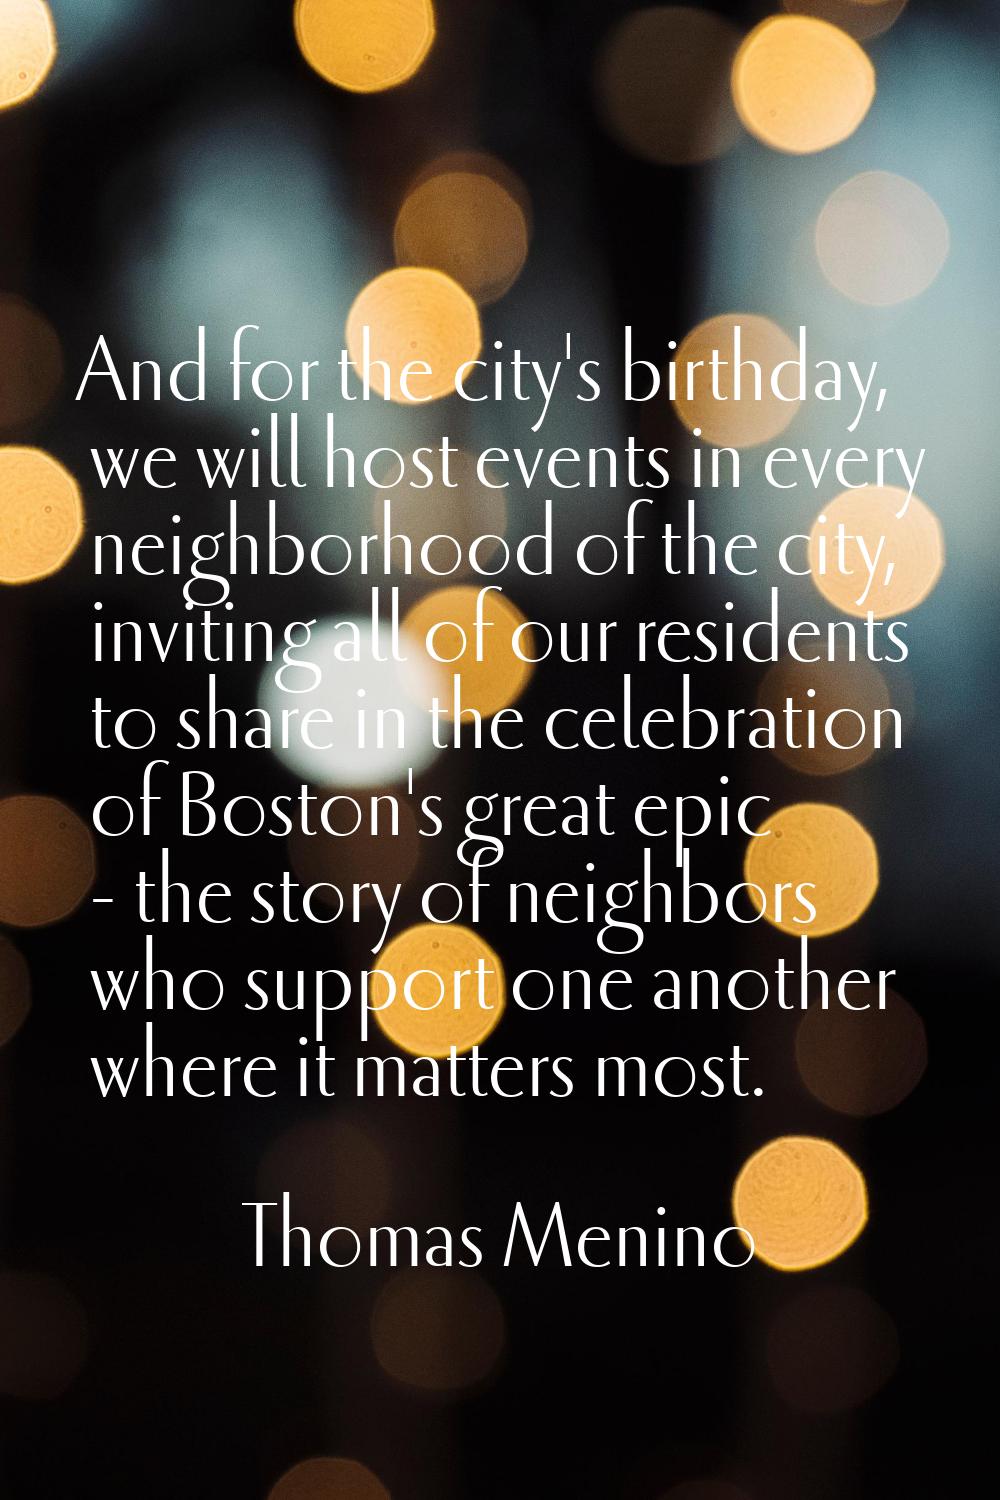 And for the city's birthday, we will host events in every neighborhood of the city, inviting all of